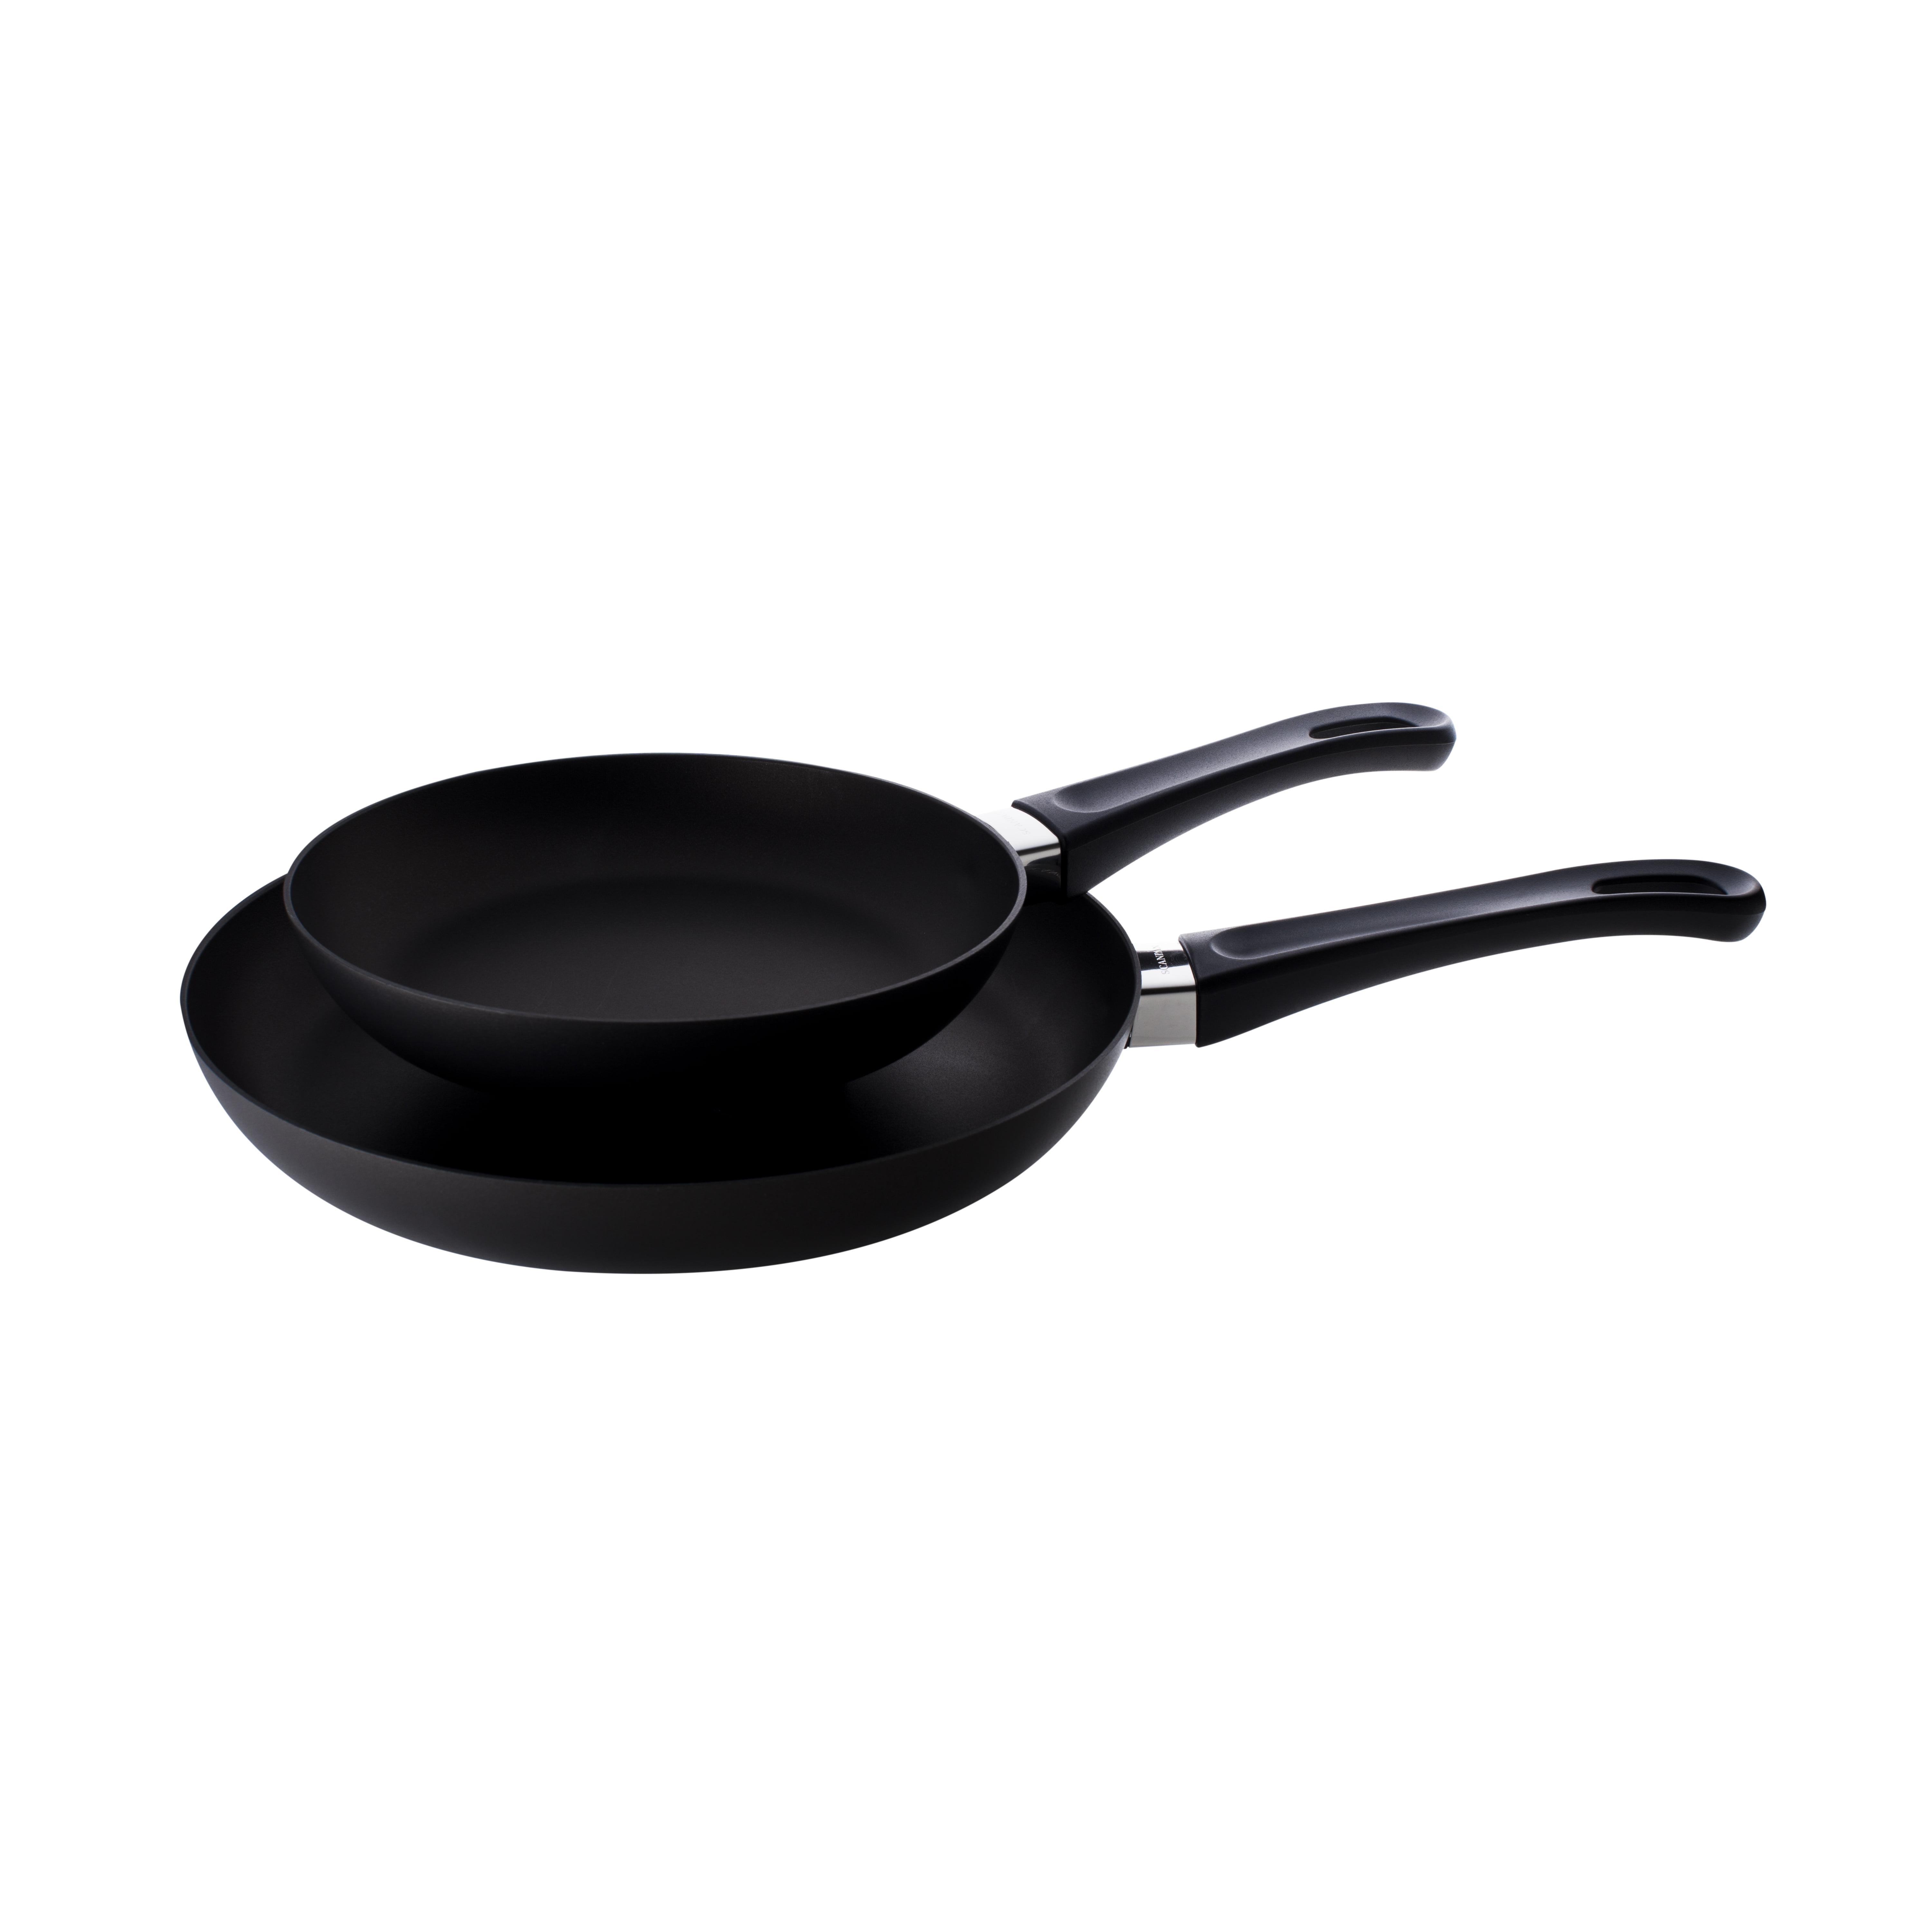 2-Pc Home Kitchen Cookware Tools Nonstick Frying Skillet Fry Pans Set Black 